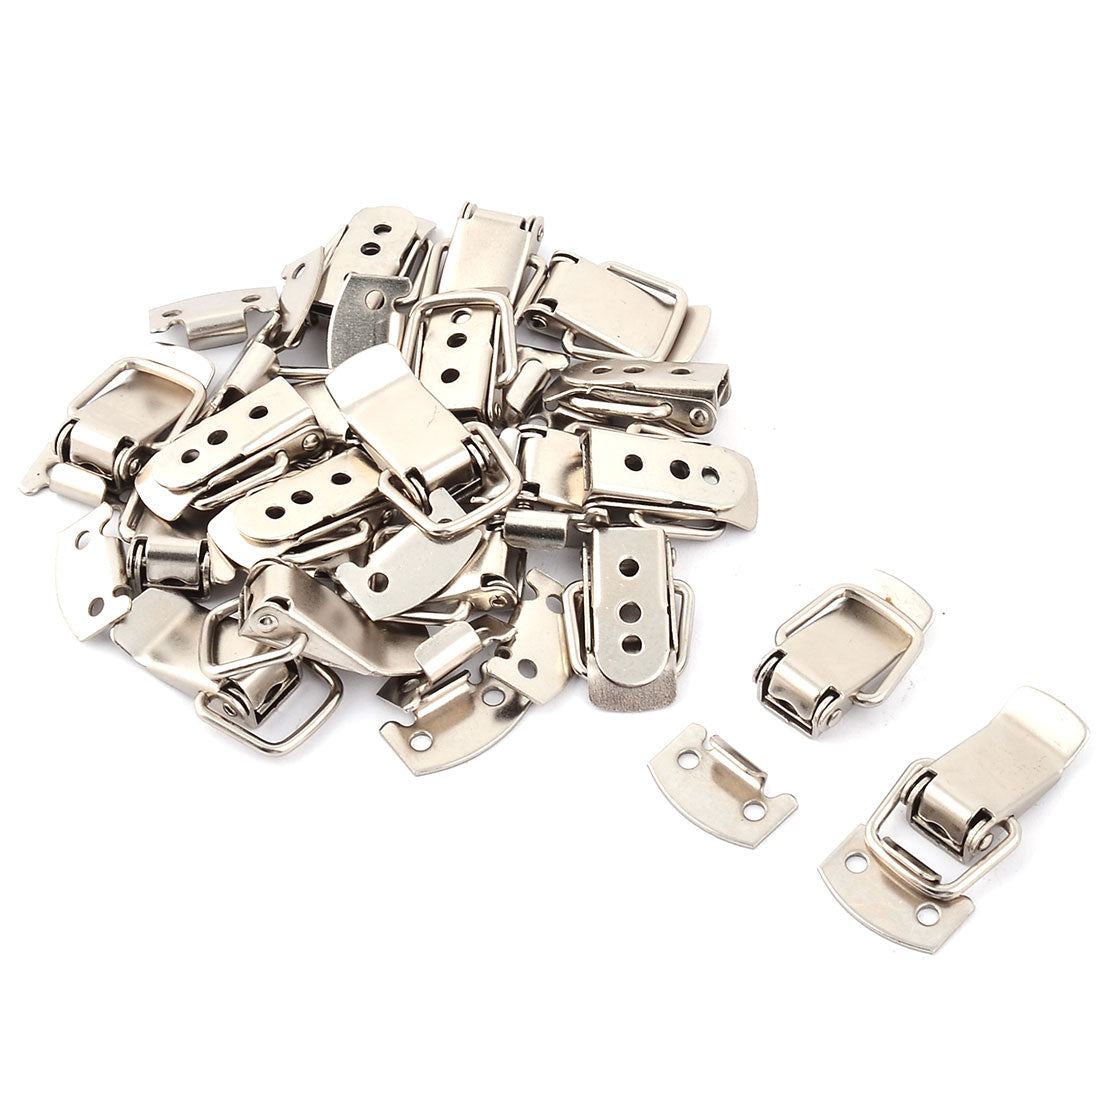 uxcell Uxcell Suitcase Tool Box Metal Buckle Toggle Latch Lock Hasp 47mm Long 19 Sets